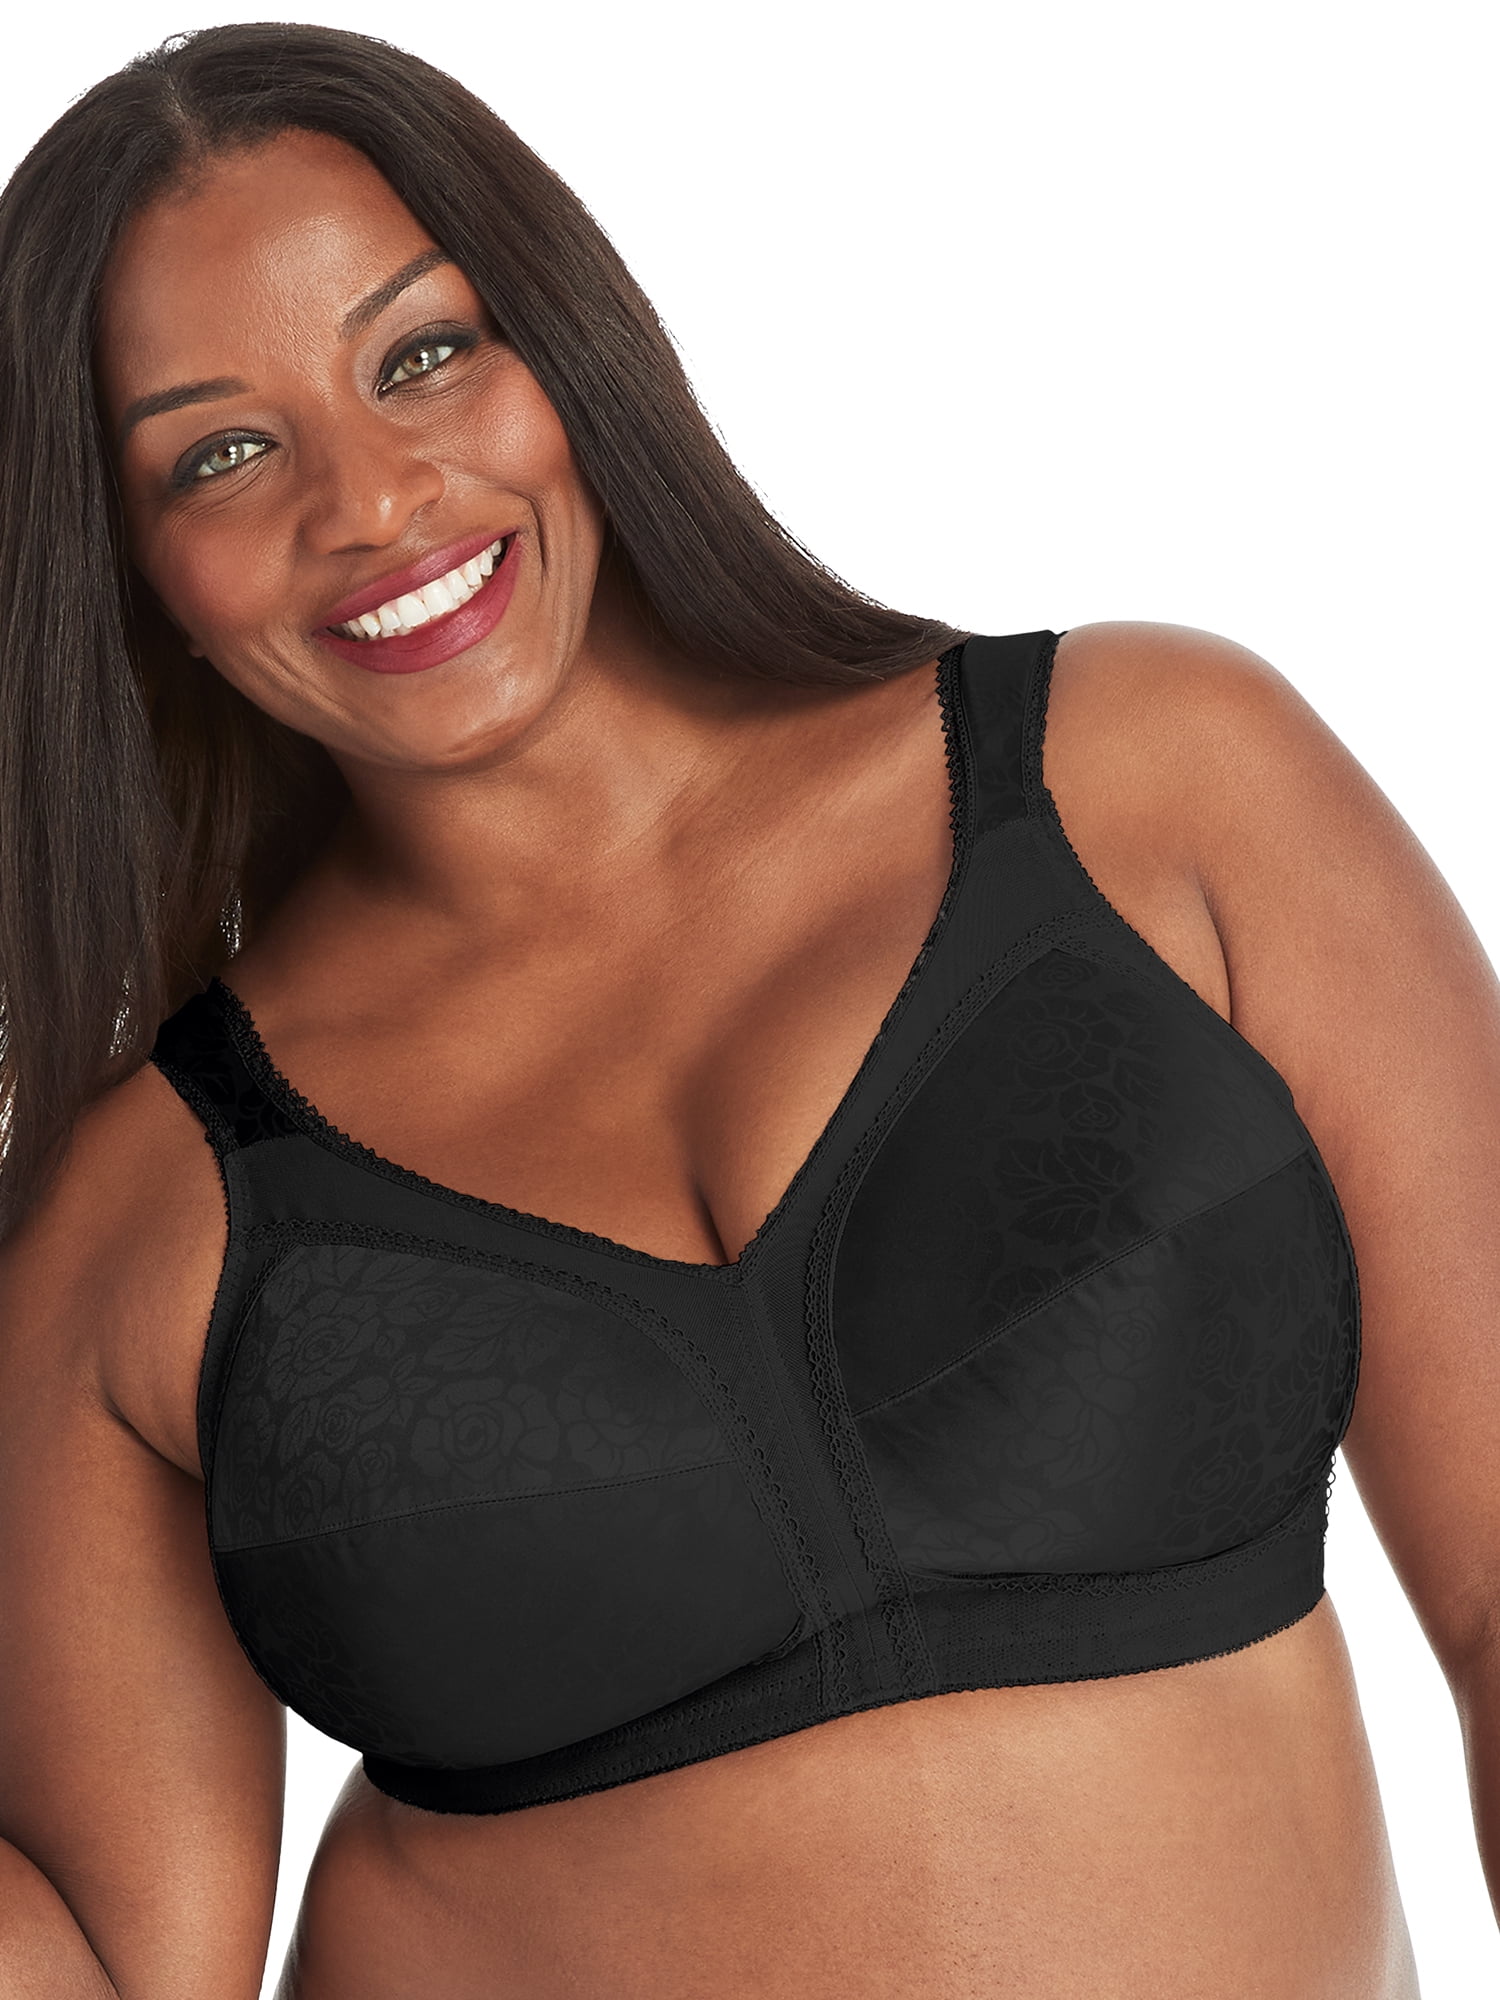 Playtex 18 Hour Supportive Flexible Back Front-Close Wireless Bra Black 38C  Women's 